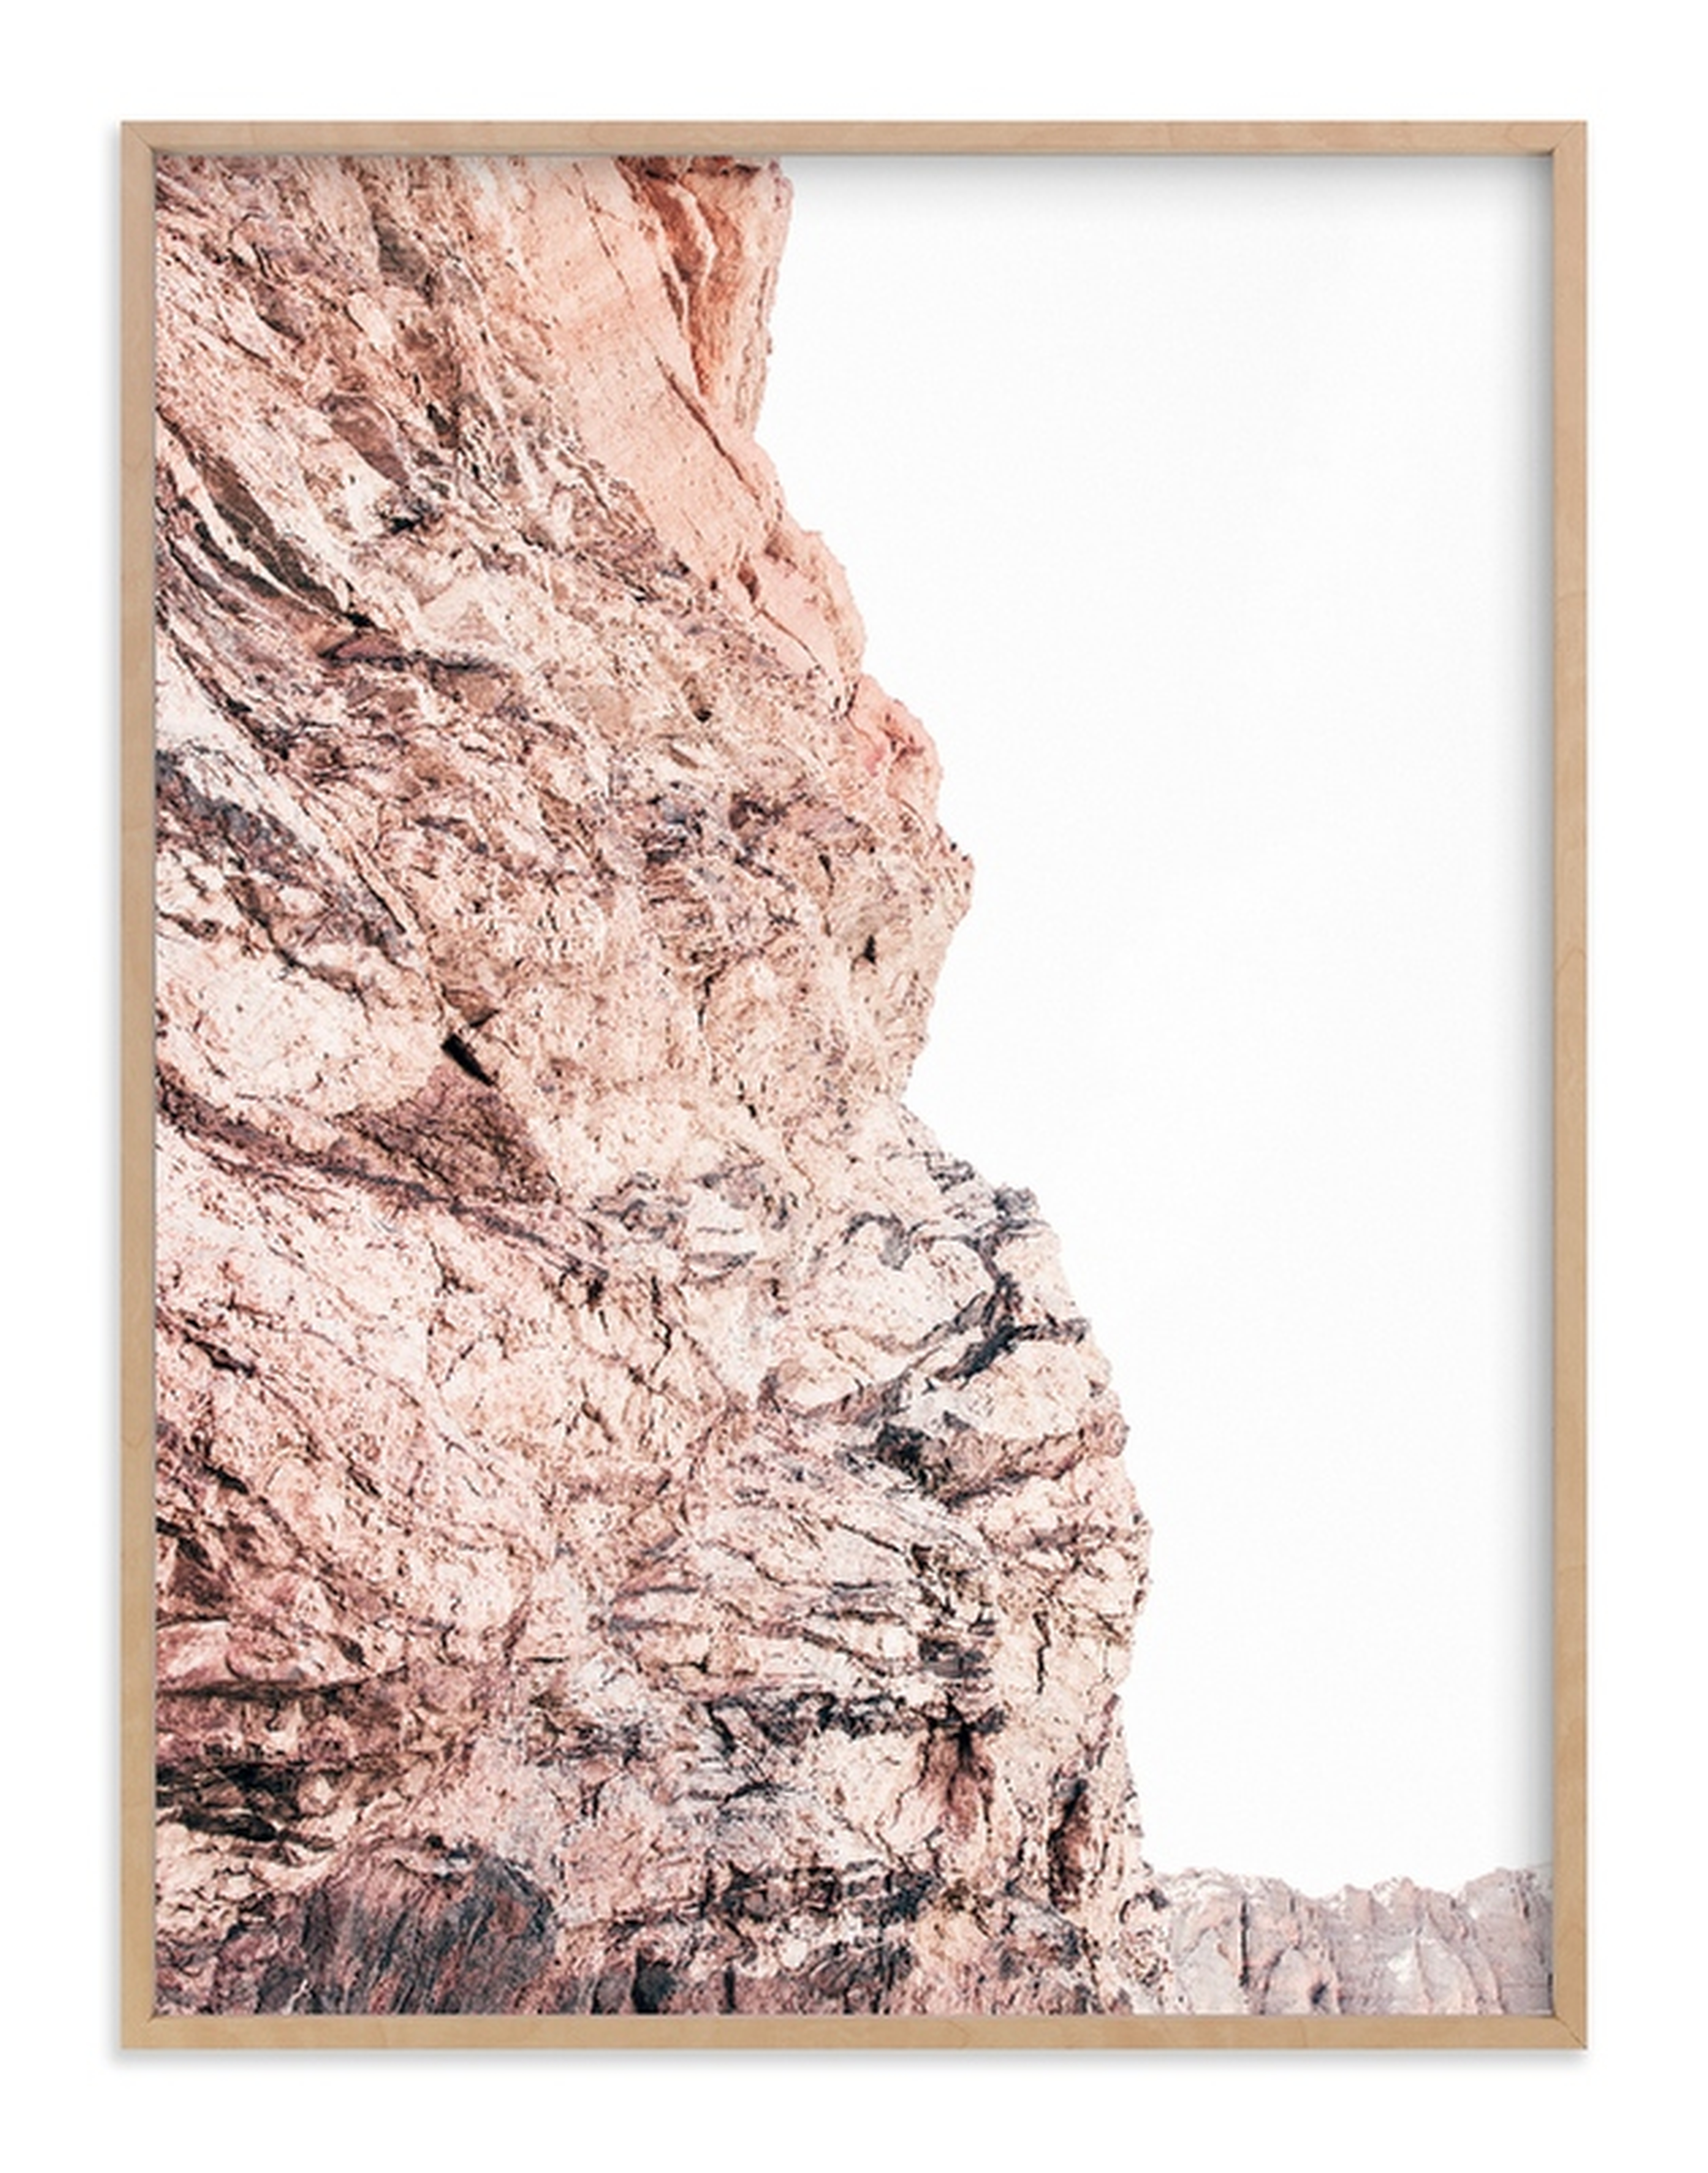 Painted Canyon 2 Art Print // Image Size: 30"x40" //Natural Raw Wood Frame .75" // Frame Size: 31.3"x41.3" - Minted